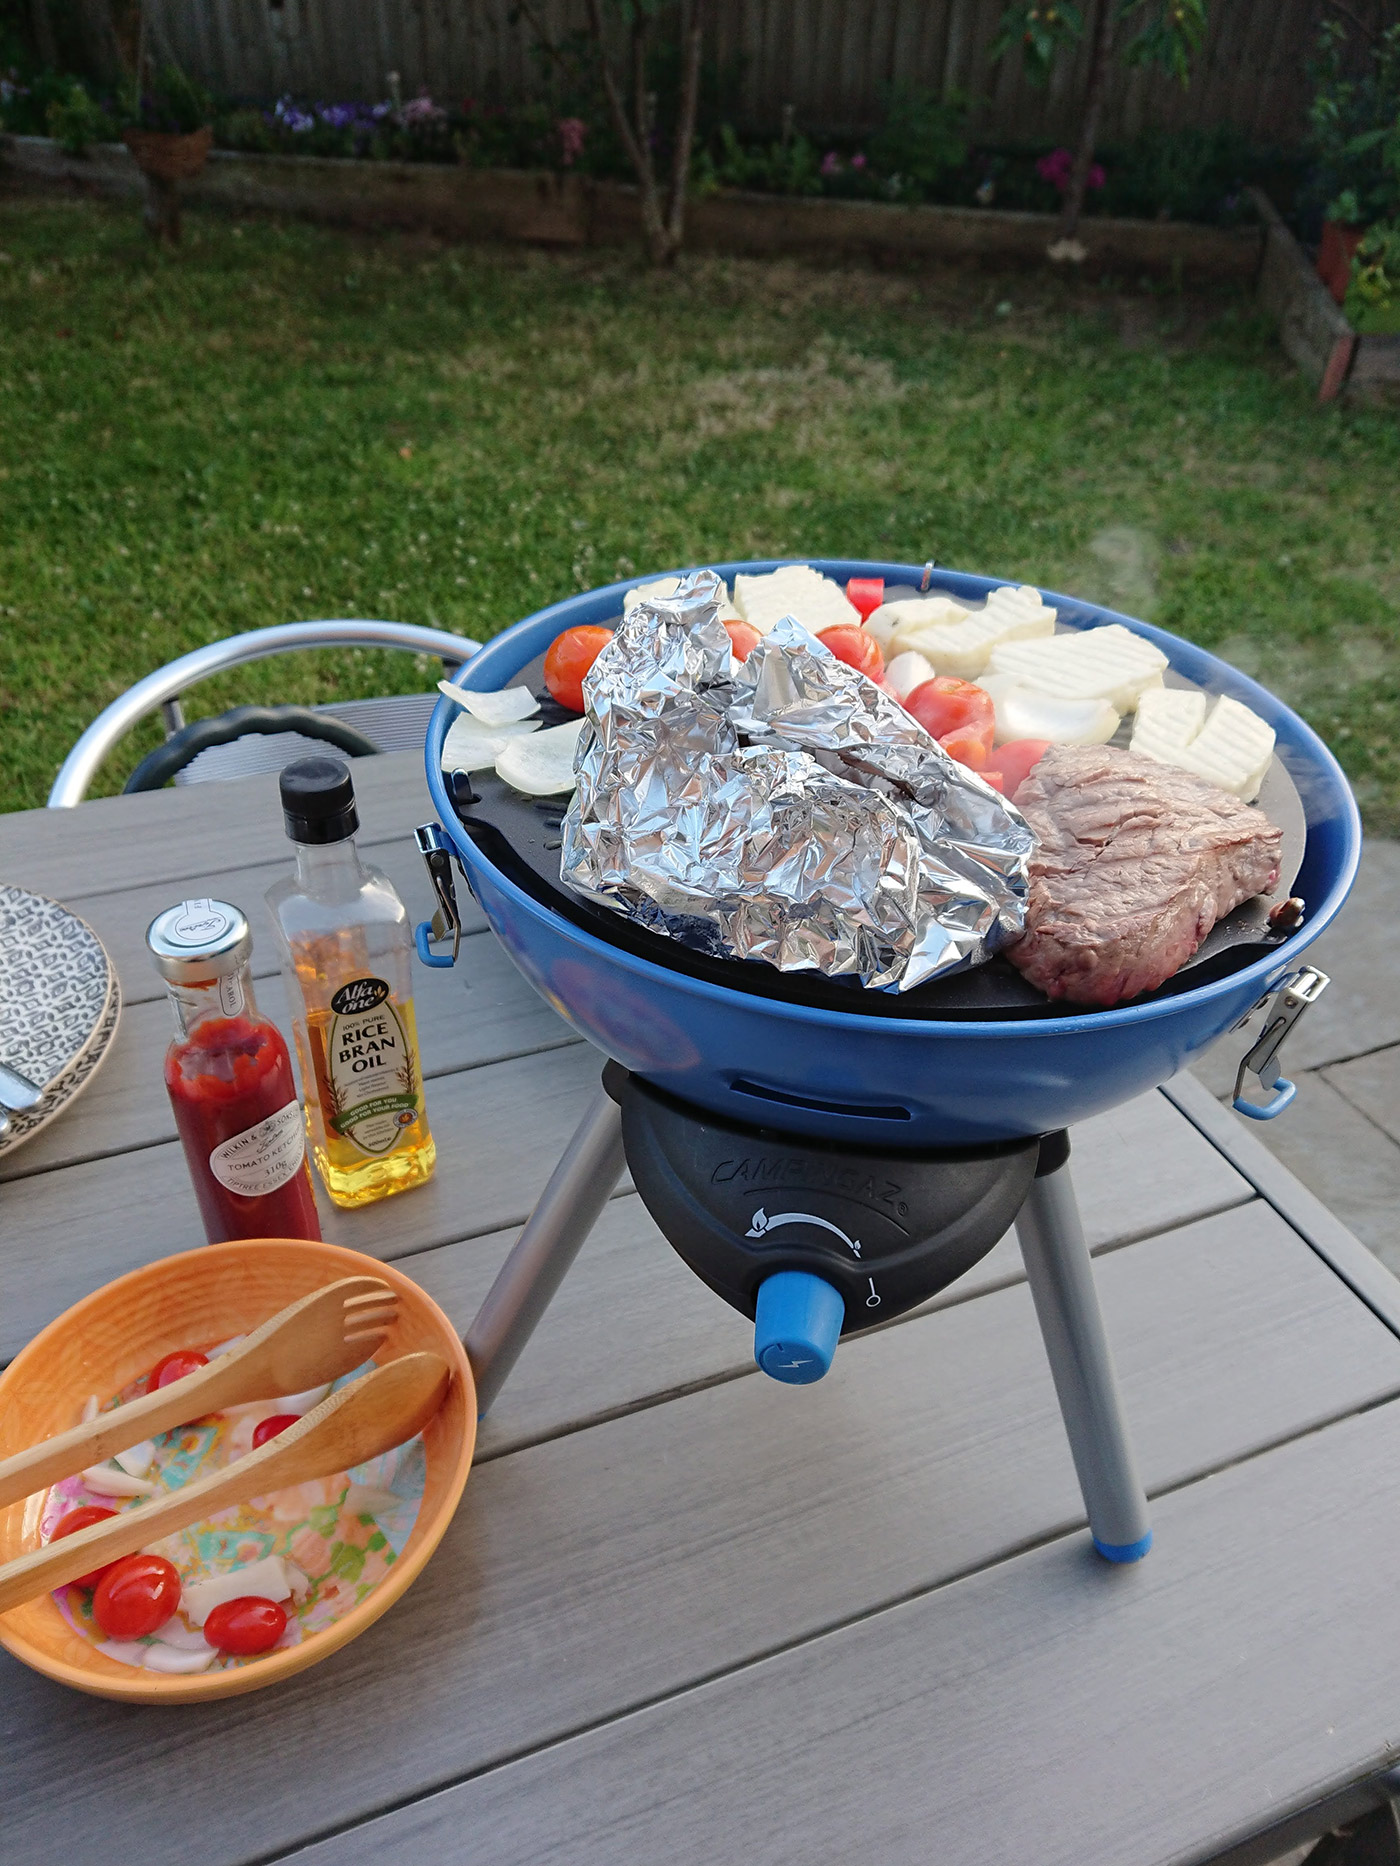 CAMPING GEAR | Putting The Campingaz Grill To The Test